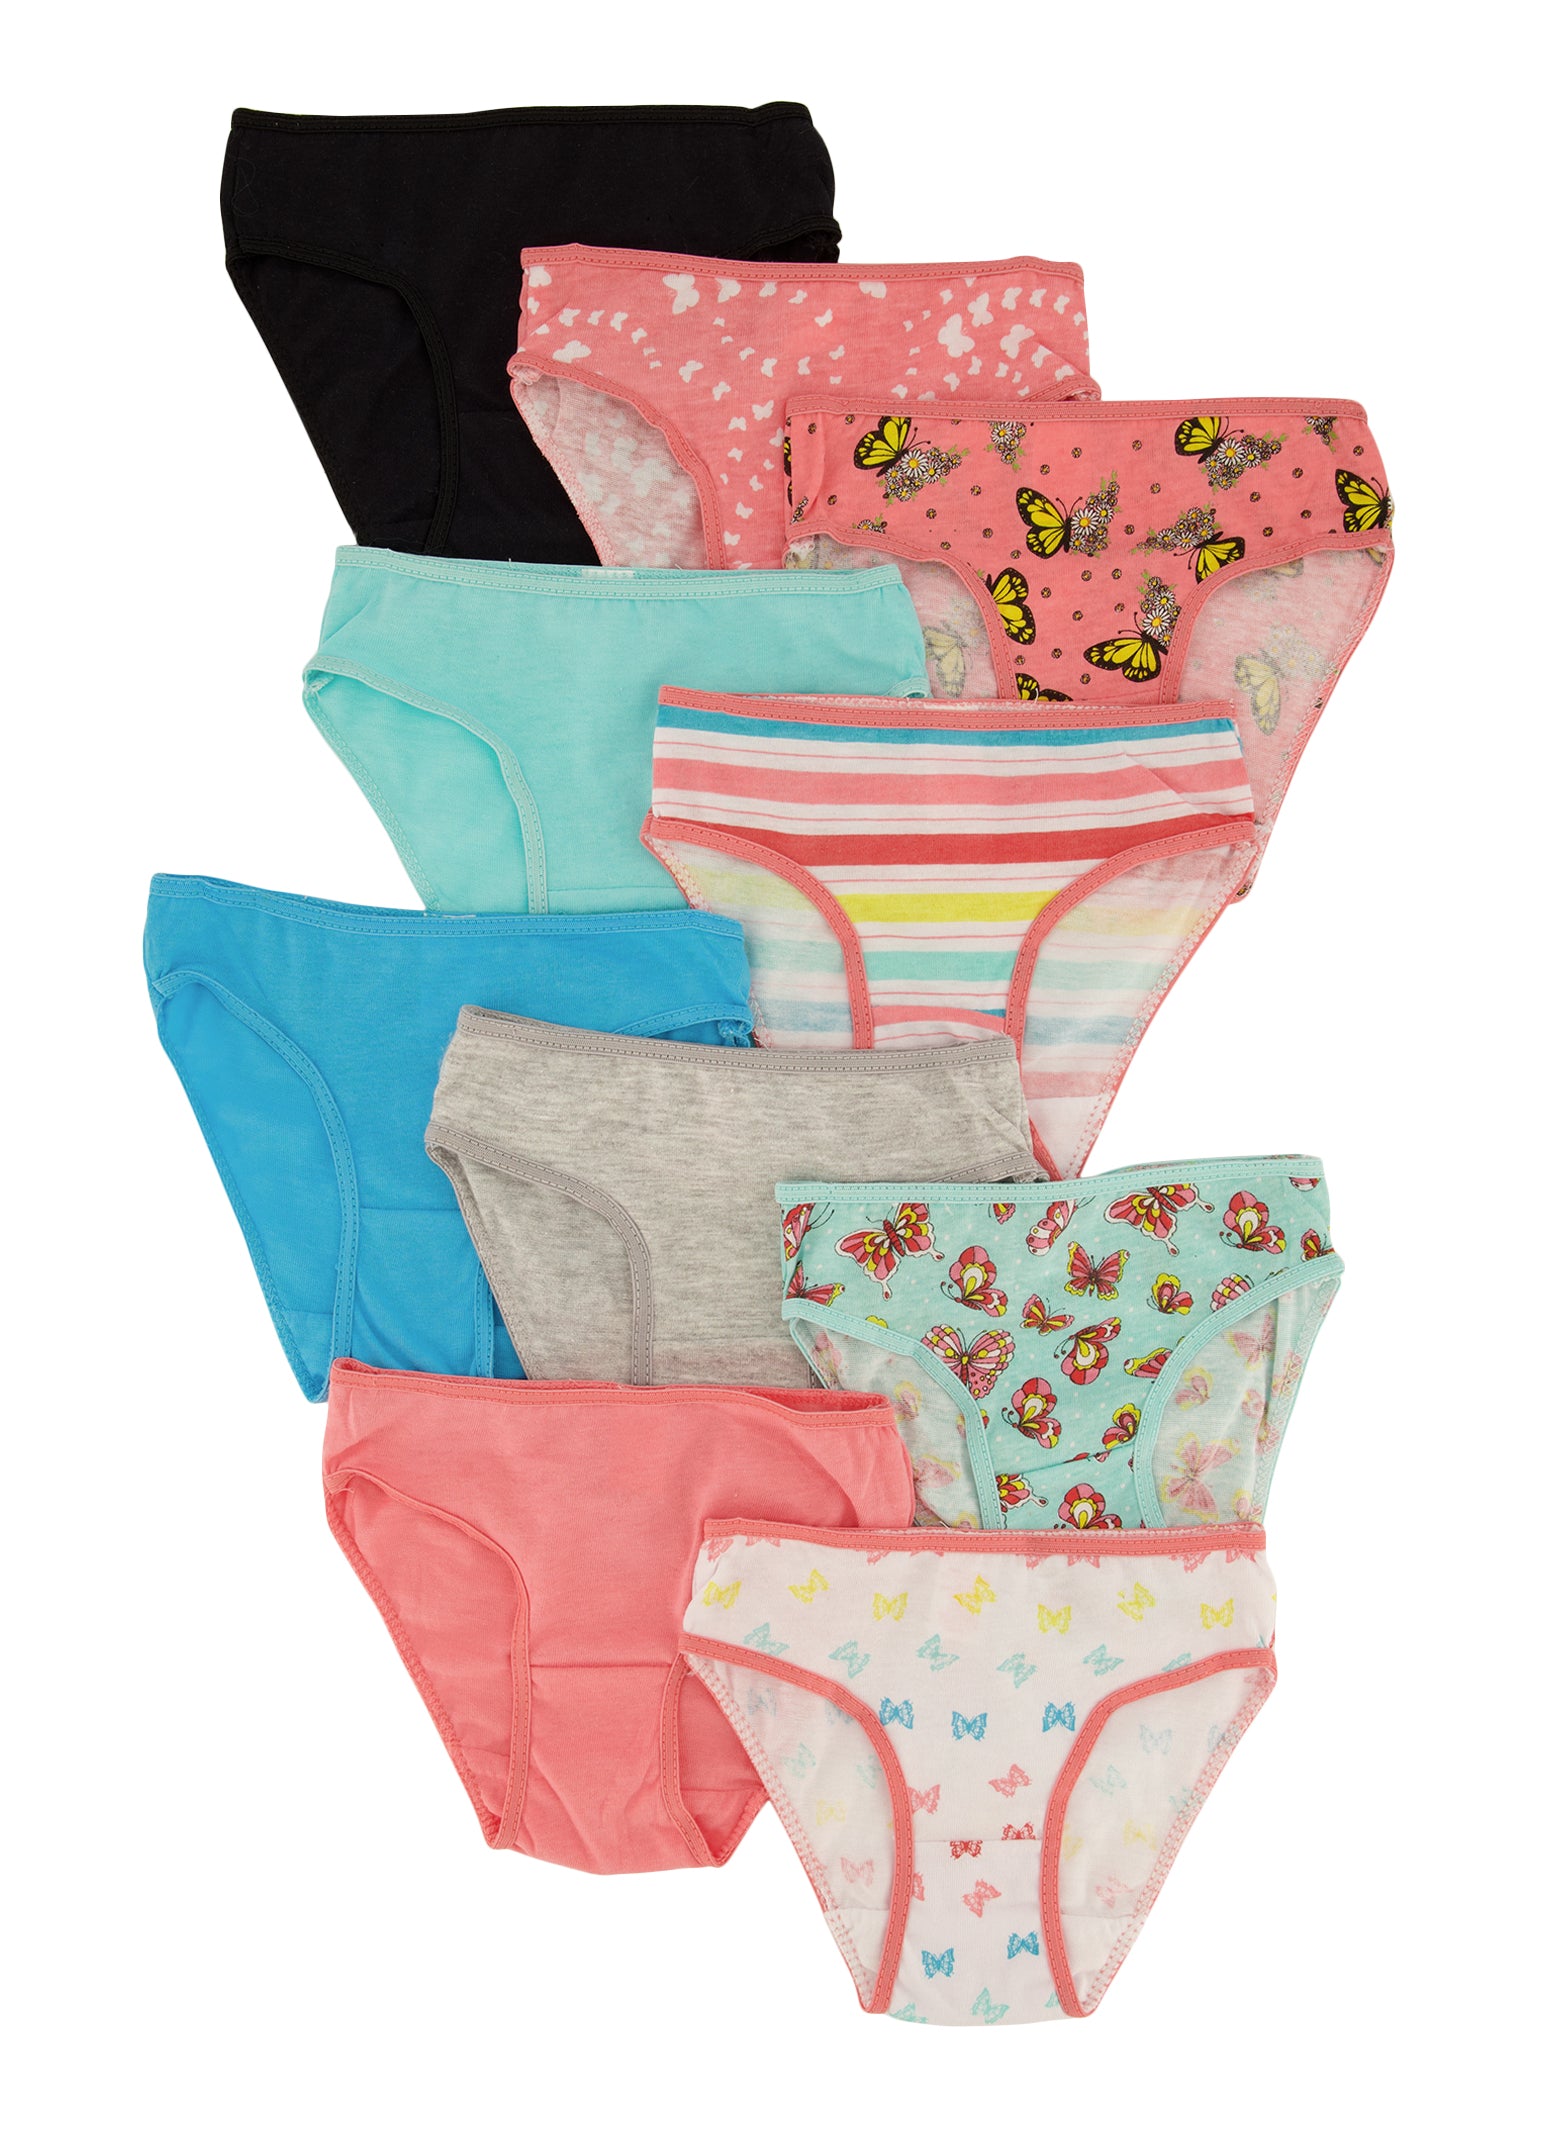 Buy Hanes Women's Cotton Bikini Panty, Assorted, Size 7 (Pack of 10) at